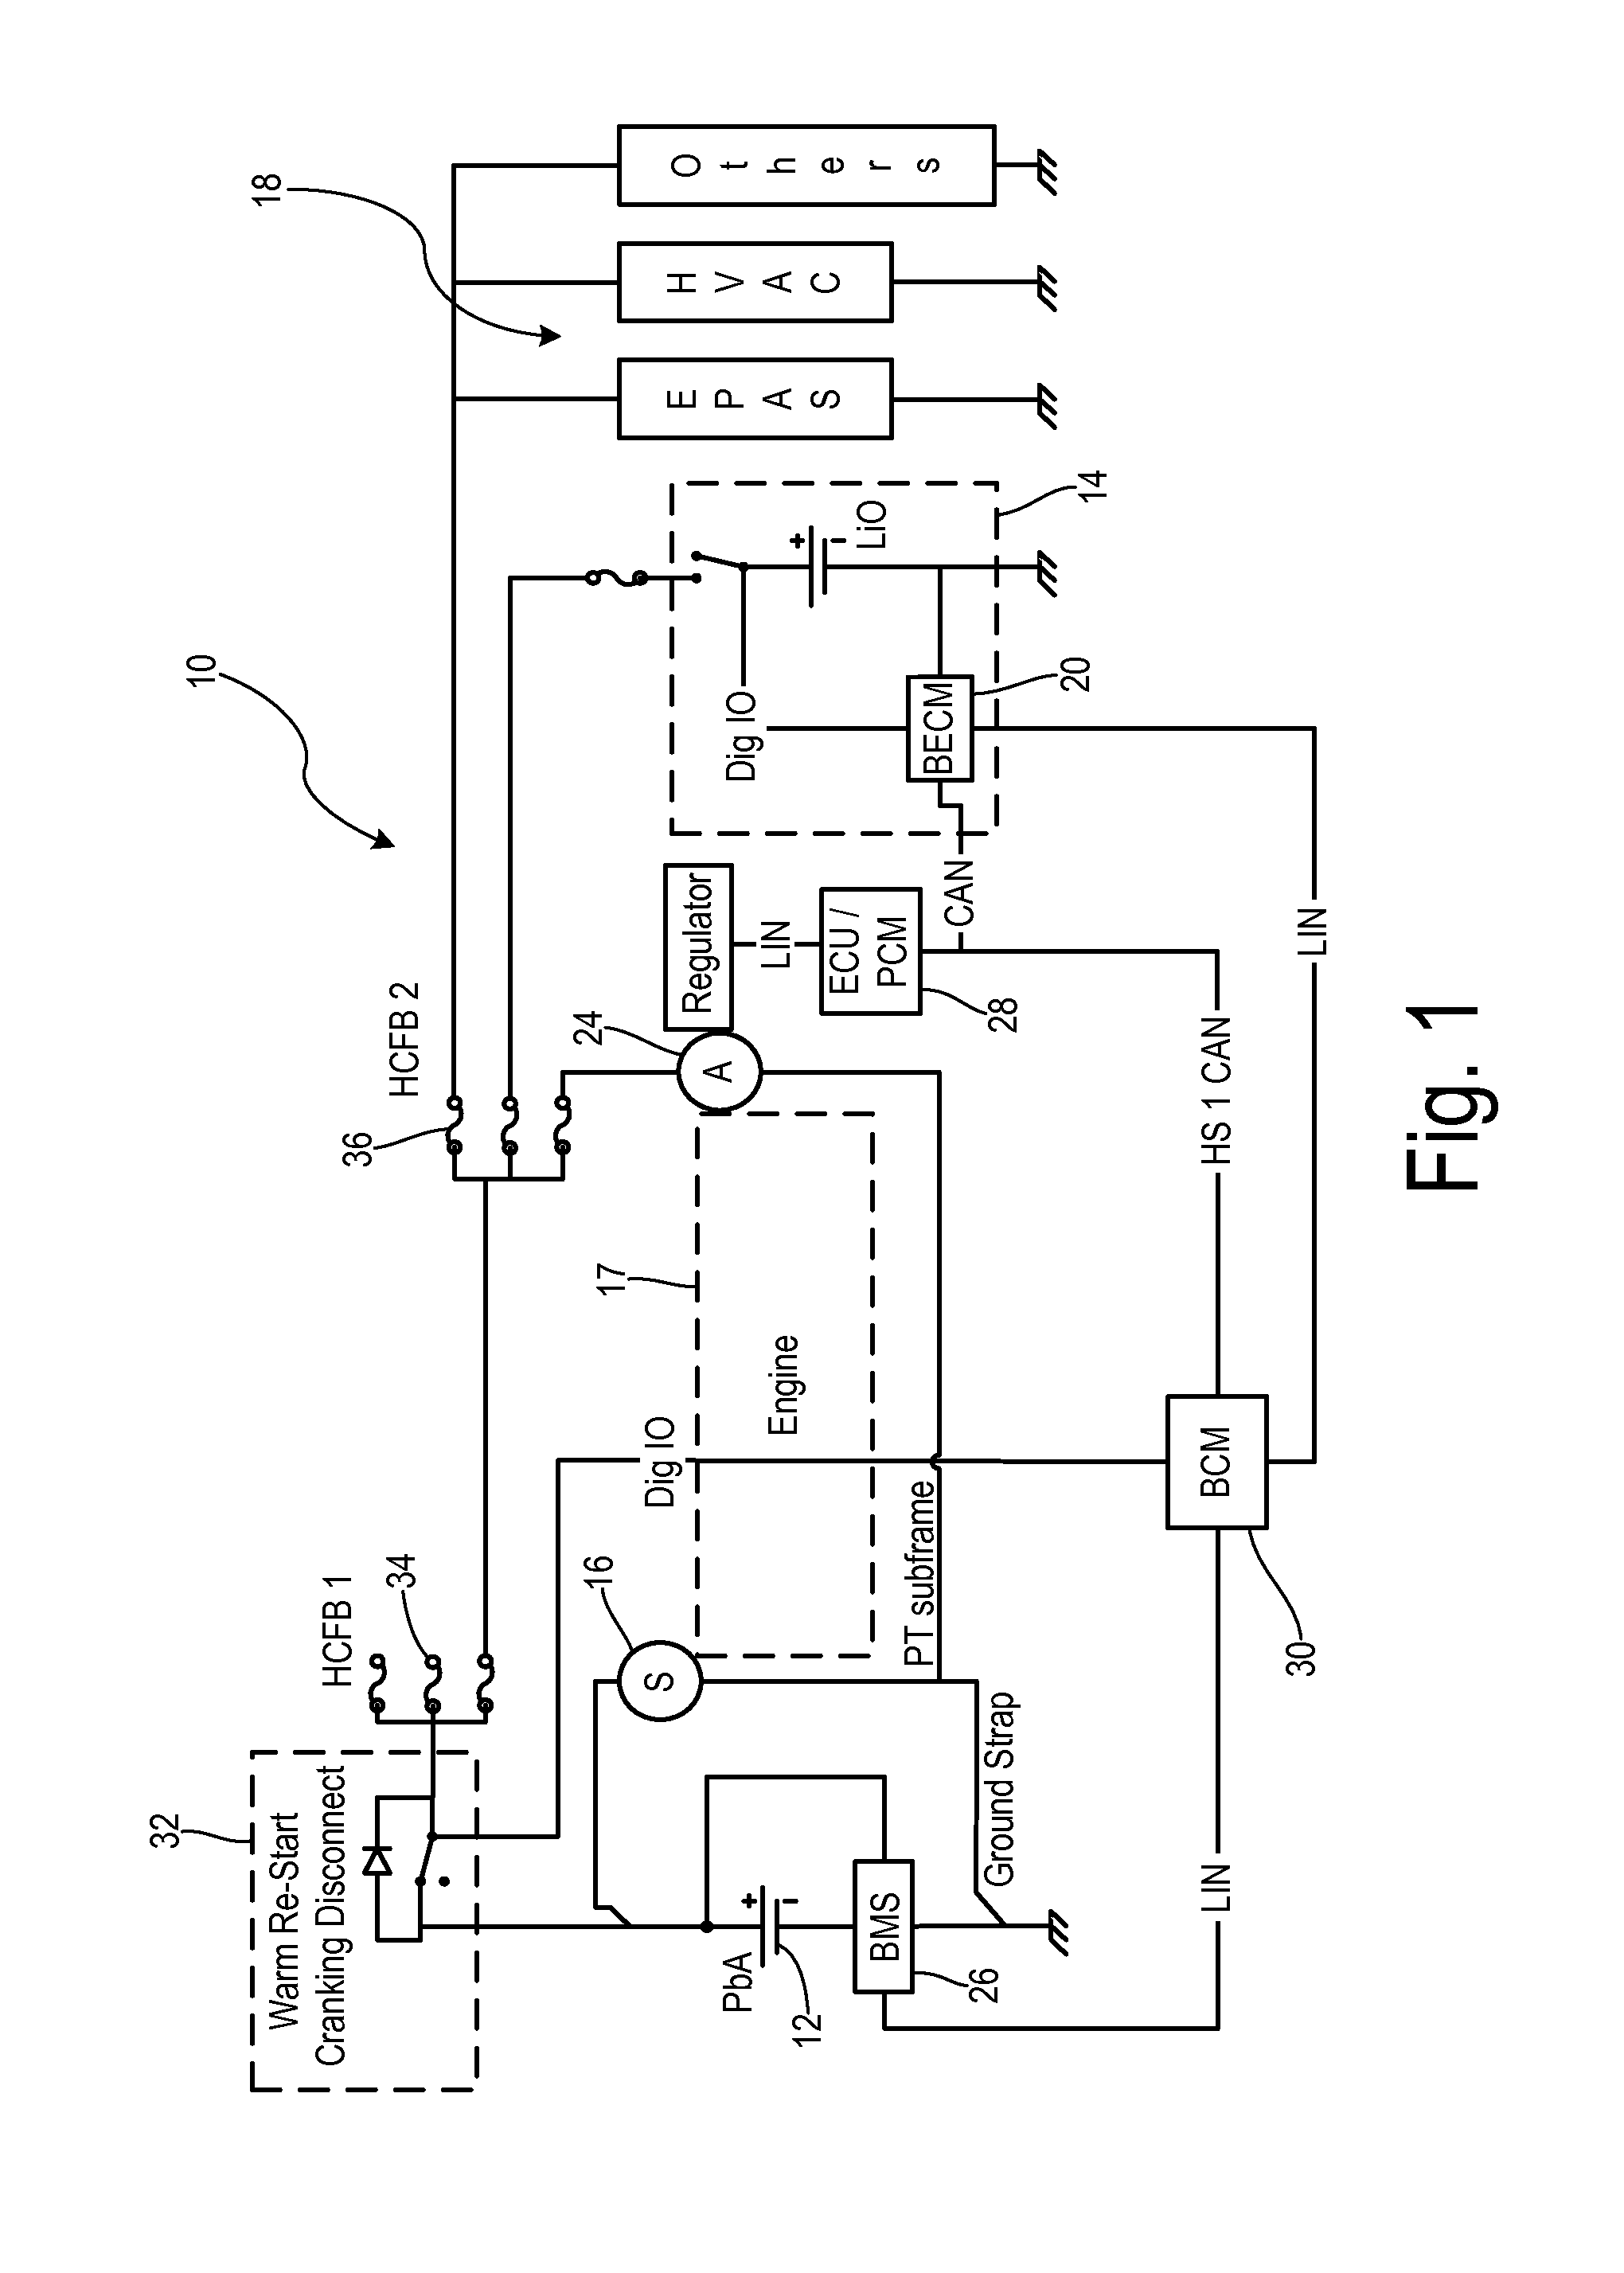 Apparatus and method to maximize vehicle functionality and fuel economy with improved drivability during engine auto stop-start operations